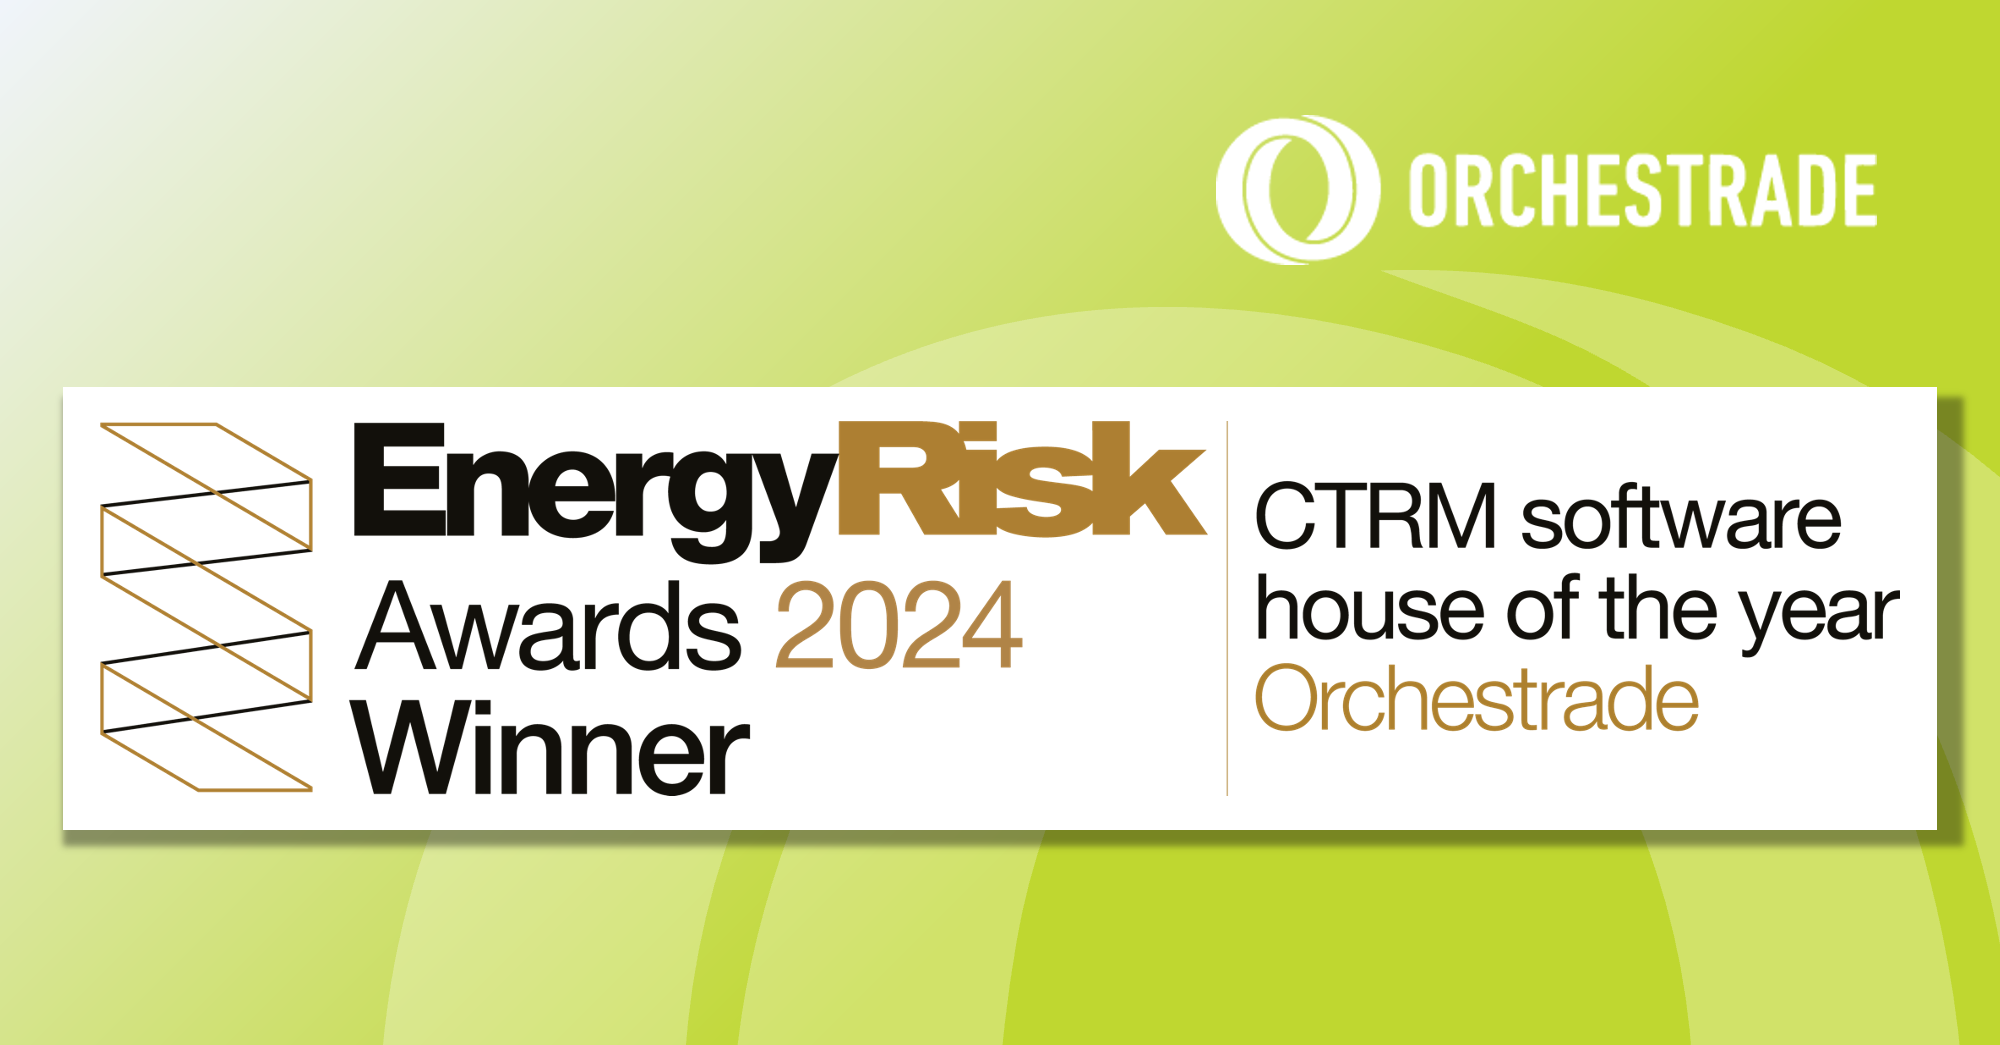 CTRM Software House of the Year - Energy Risk 2024